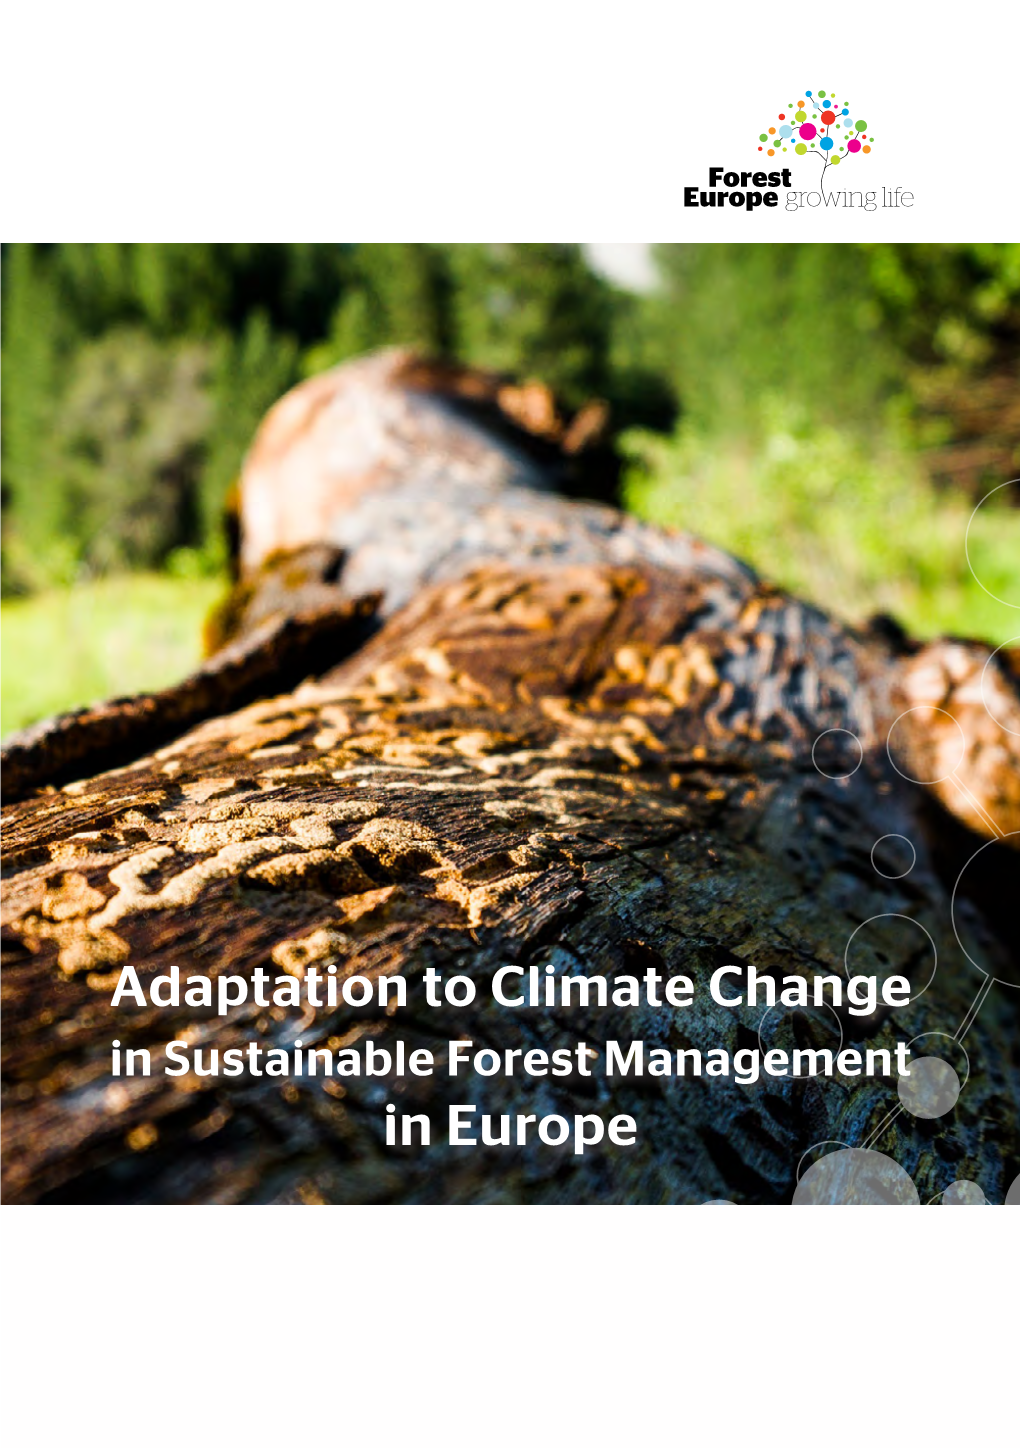 Adaptation to Climate Change in Sustainable Forest Management in Europe